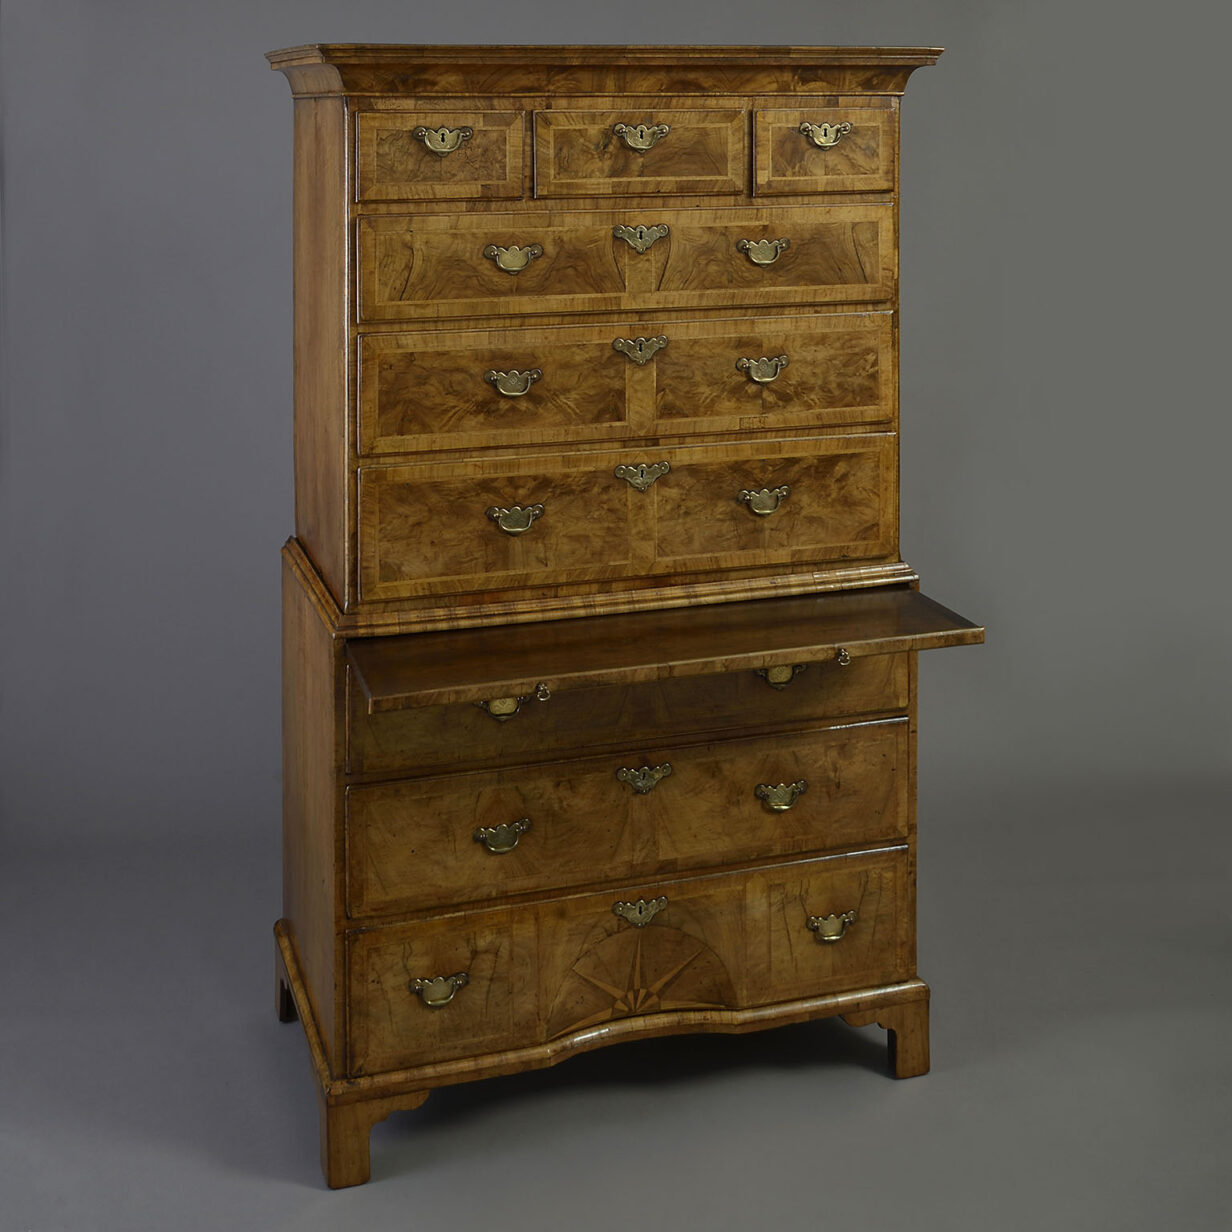 Early 18th century george i period burr walnut chest on chest